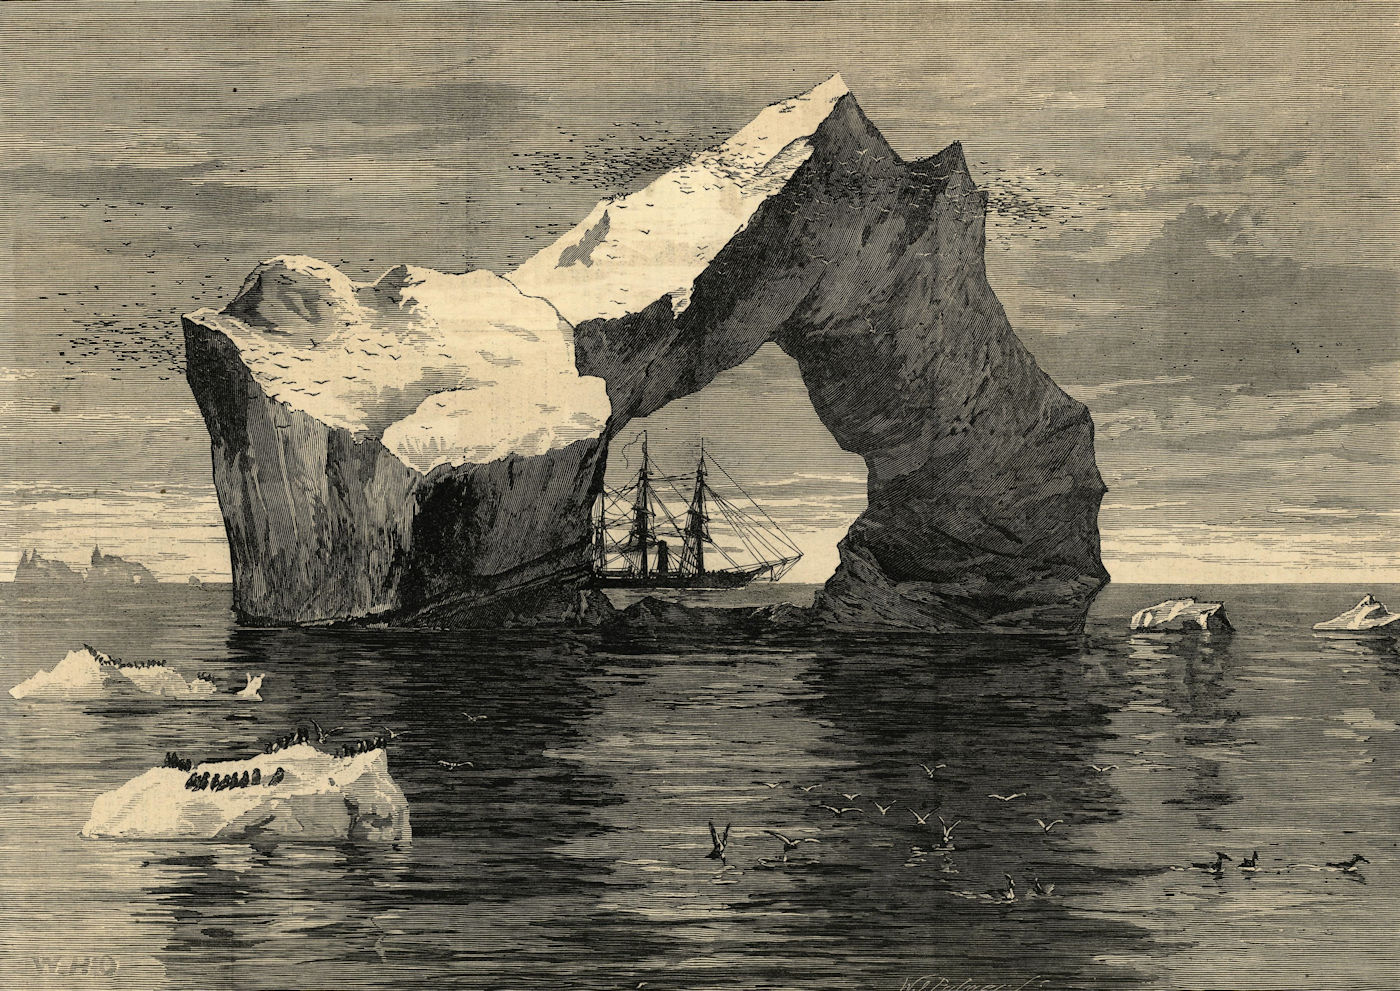 Gigantic Iceberg seen by the Arctic ships. Polar Regions 1875 antique ILN page